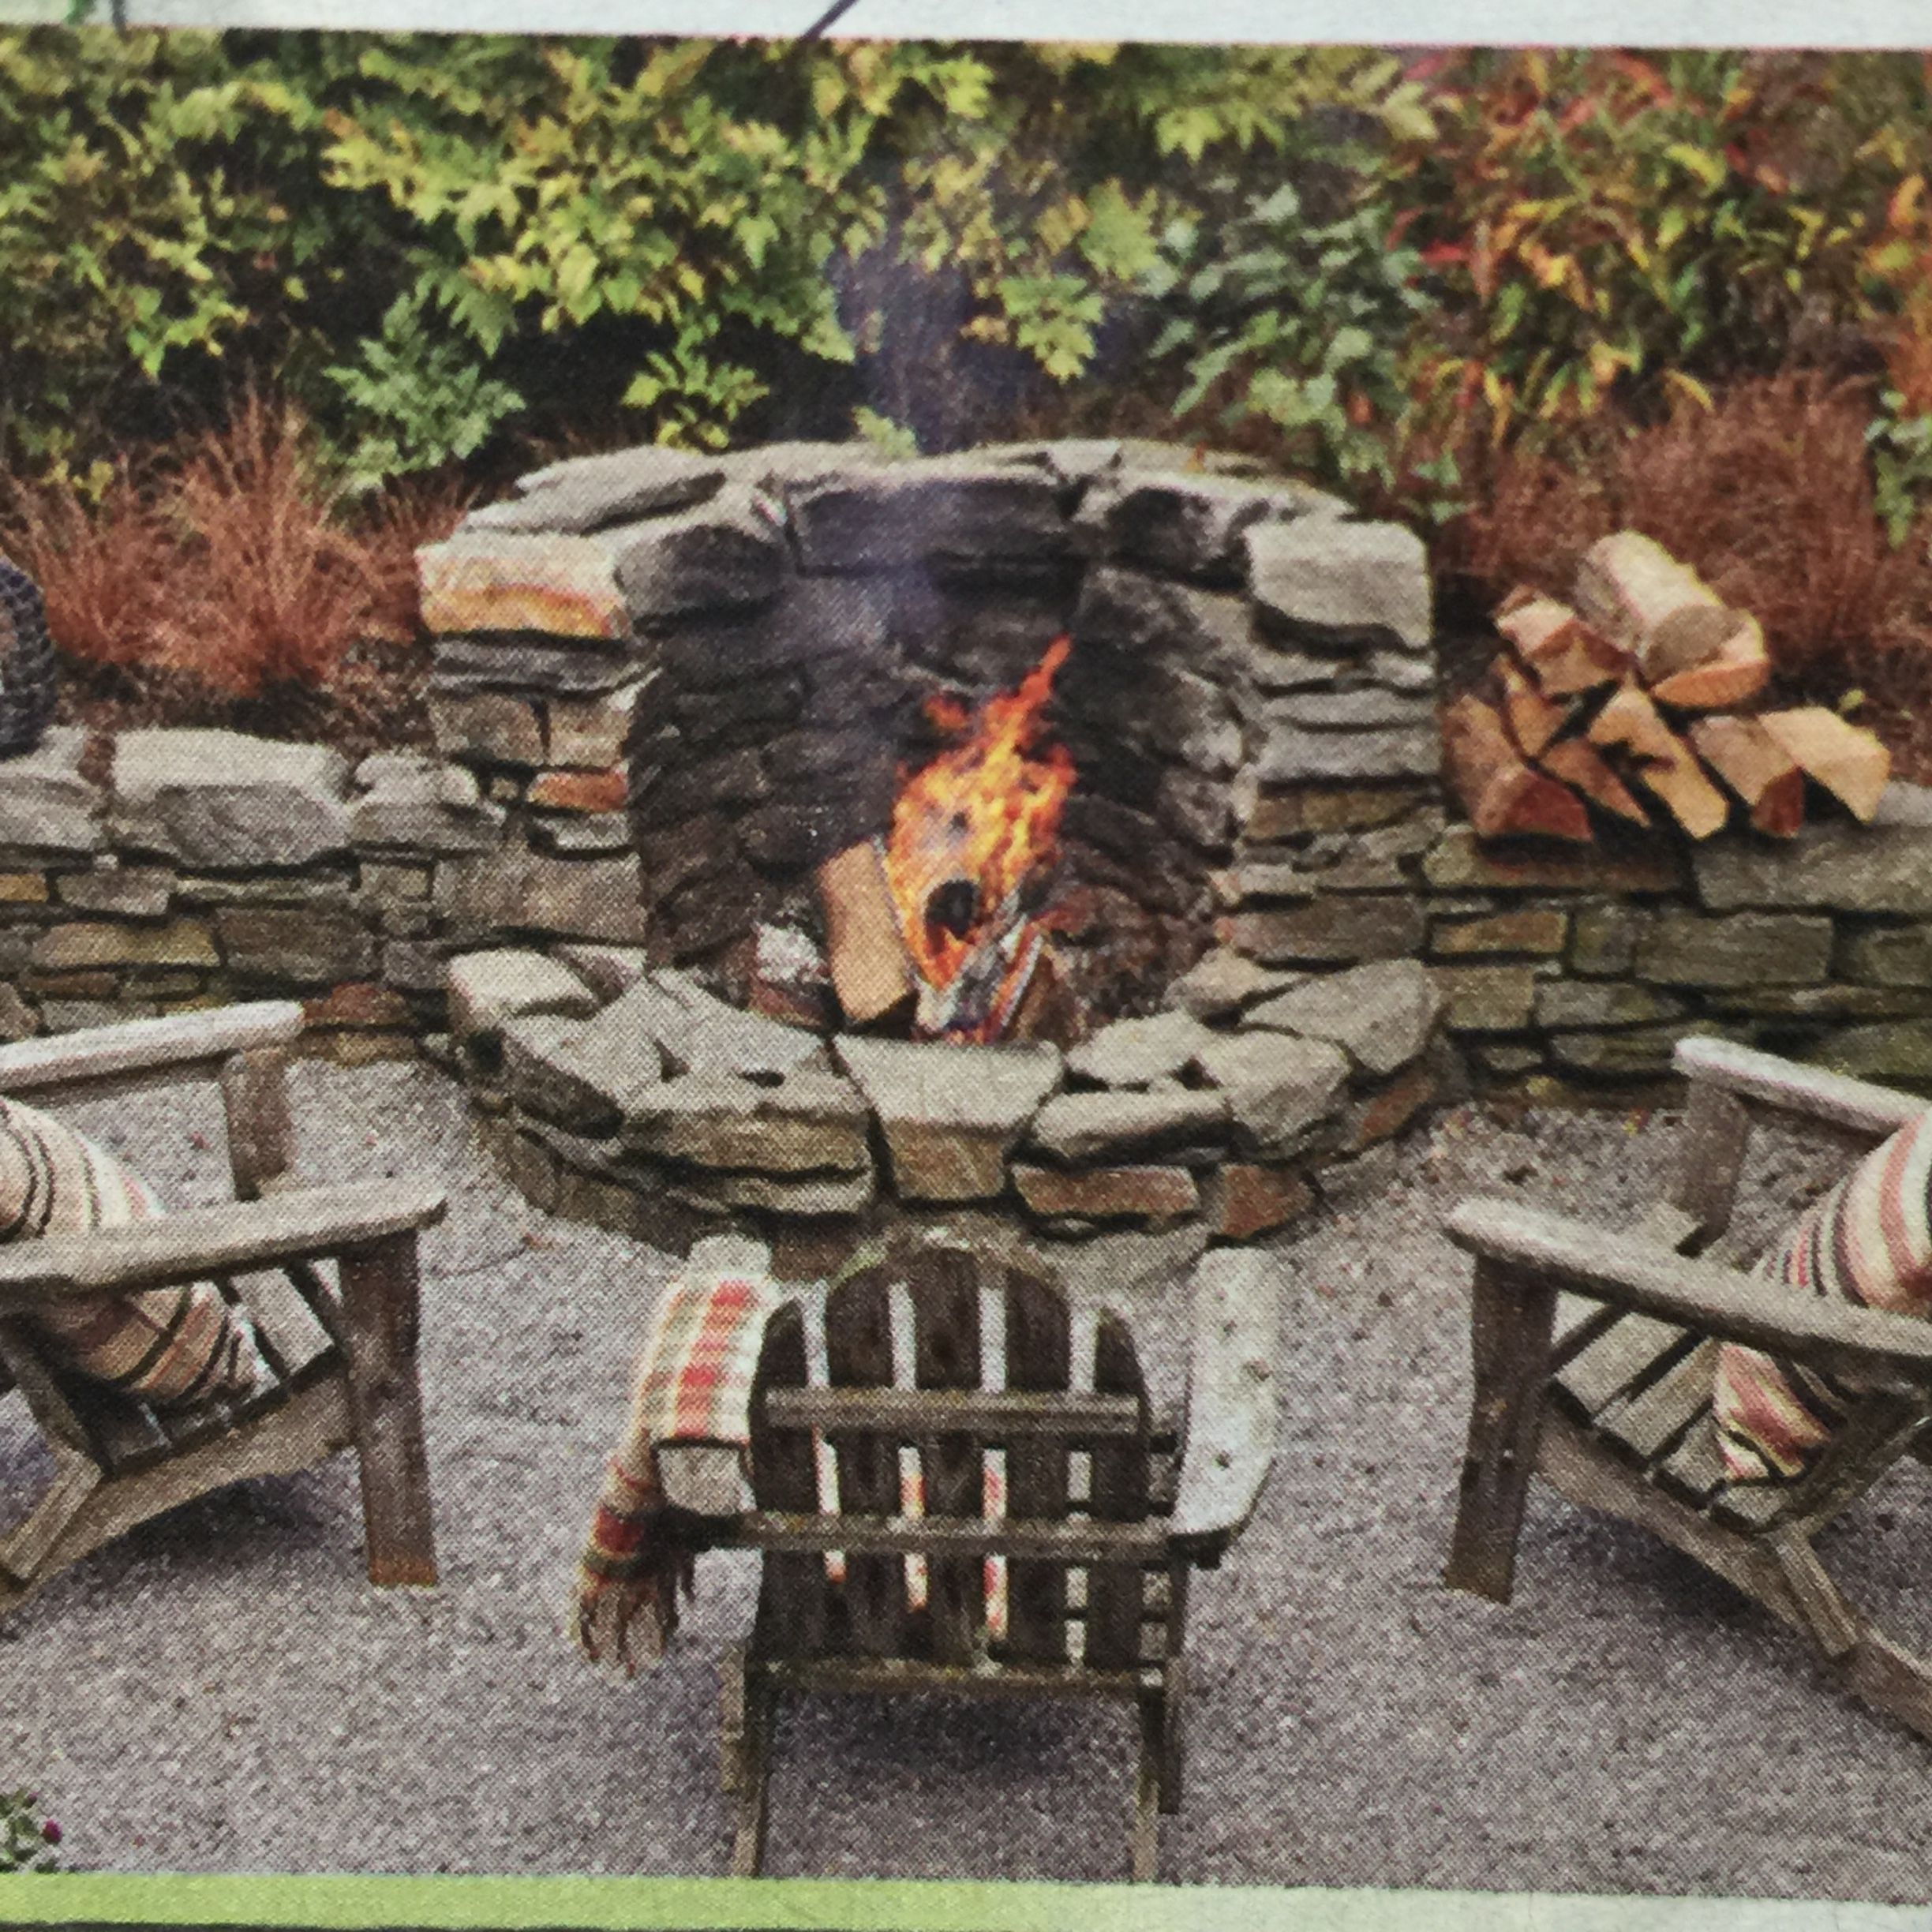 Fire Pit built into Rock Wall